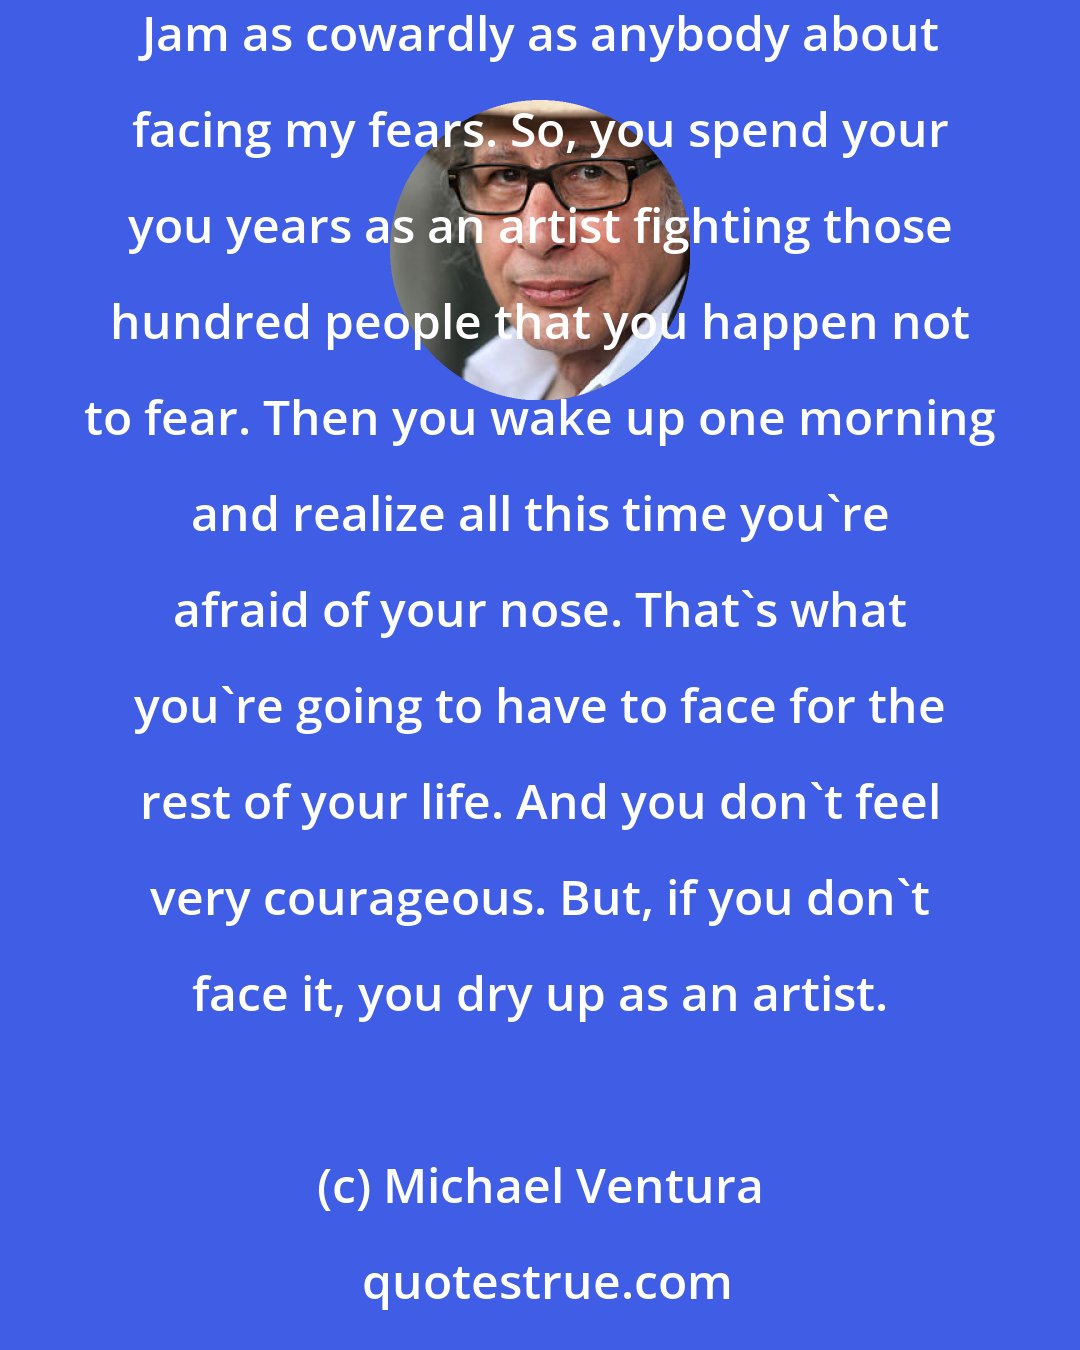 Michael Ventura: I always thought Cyrano De Bergerac was a coward. He could fight a hundred swordsmen, but he was afraid of his nose, and he was afraid of Roxanne. Jam as cowardly as anybody about facing my fears. So, you spend your you years as an artist fighting those hundred people that you happen not to fear. Then you wake up one morning and realize all this time you're afraid of your nose. That's what you're going to have to face for the rest of your life. And you don't feel very courageous. But, if you don't face it, you dry up as an artist.